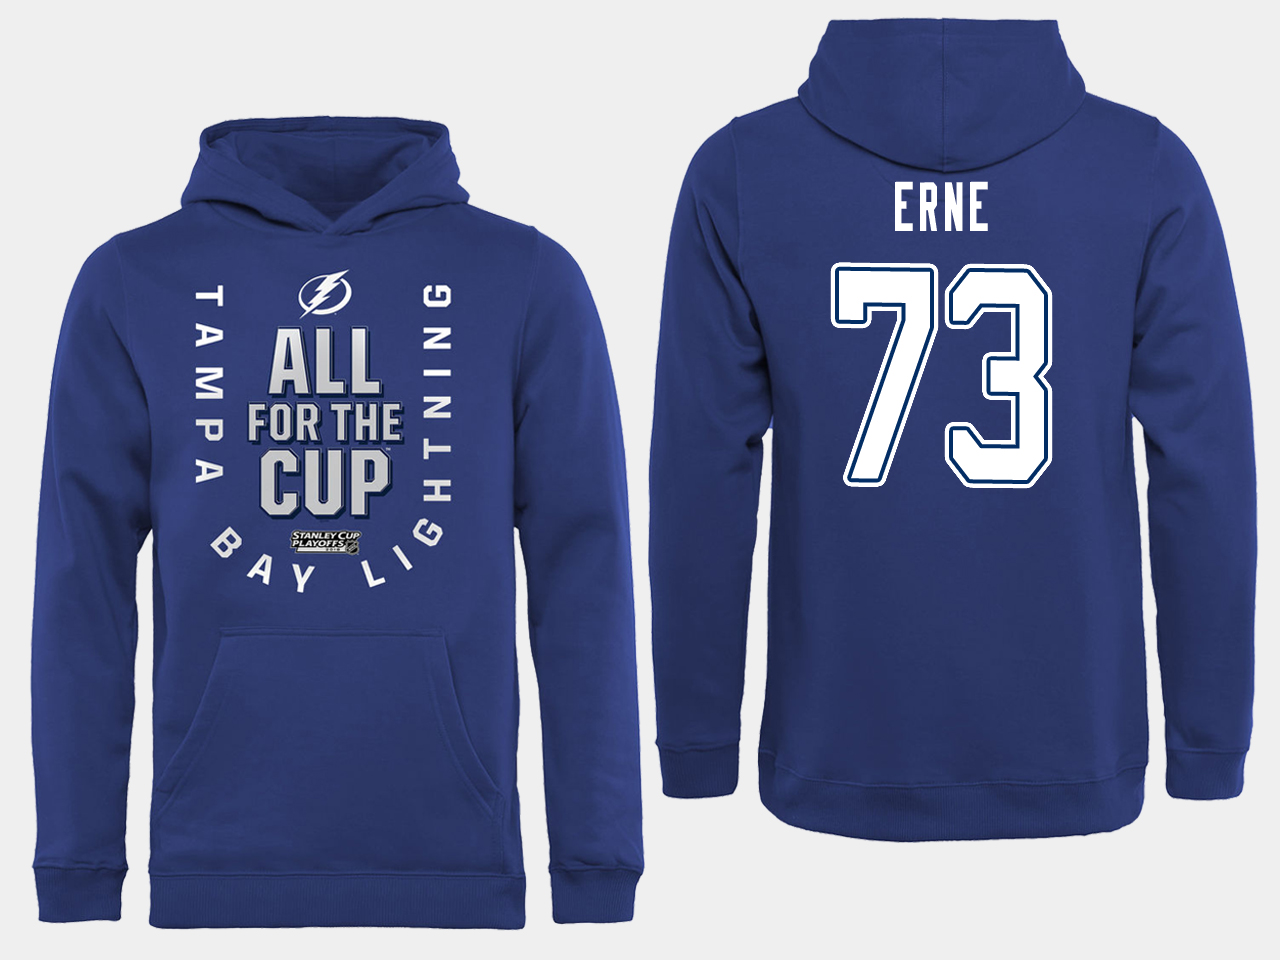 NHL Men adidas Tampa Bay Lightning #73 Erne blue All for the Cup Hoodie